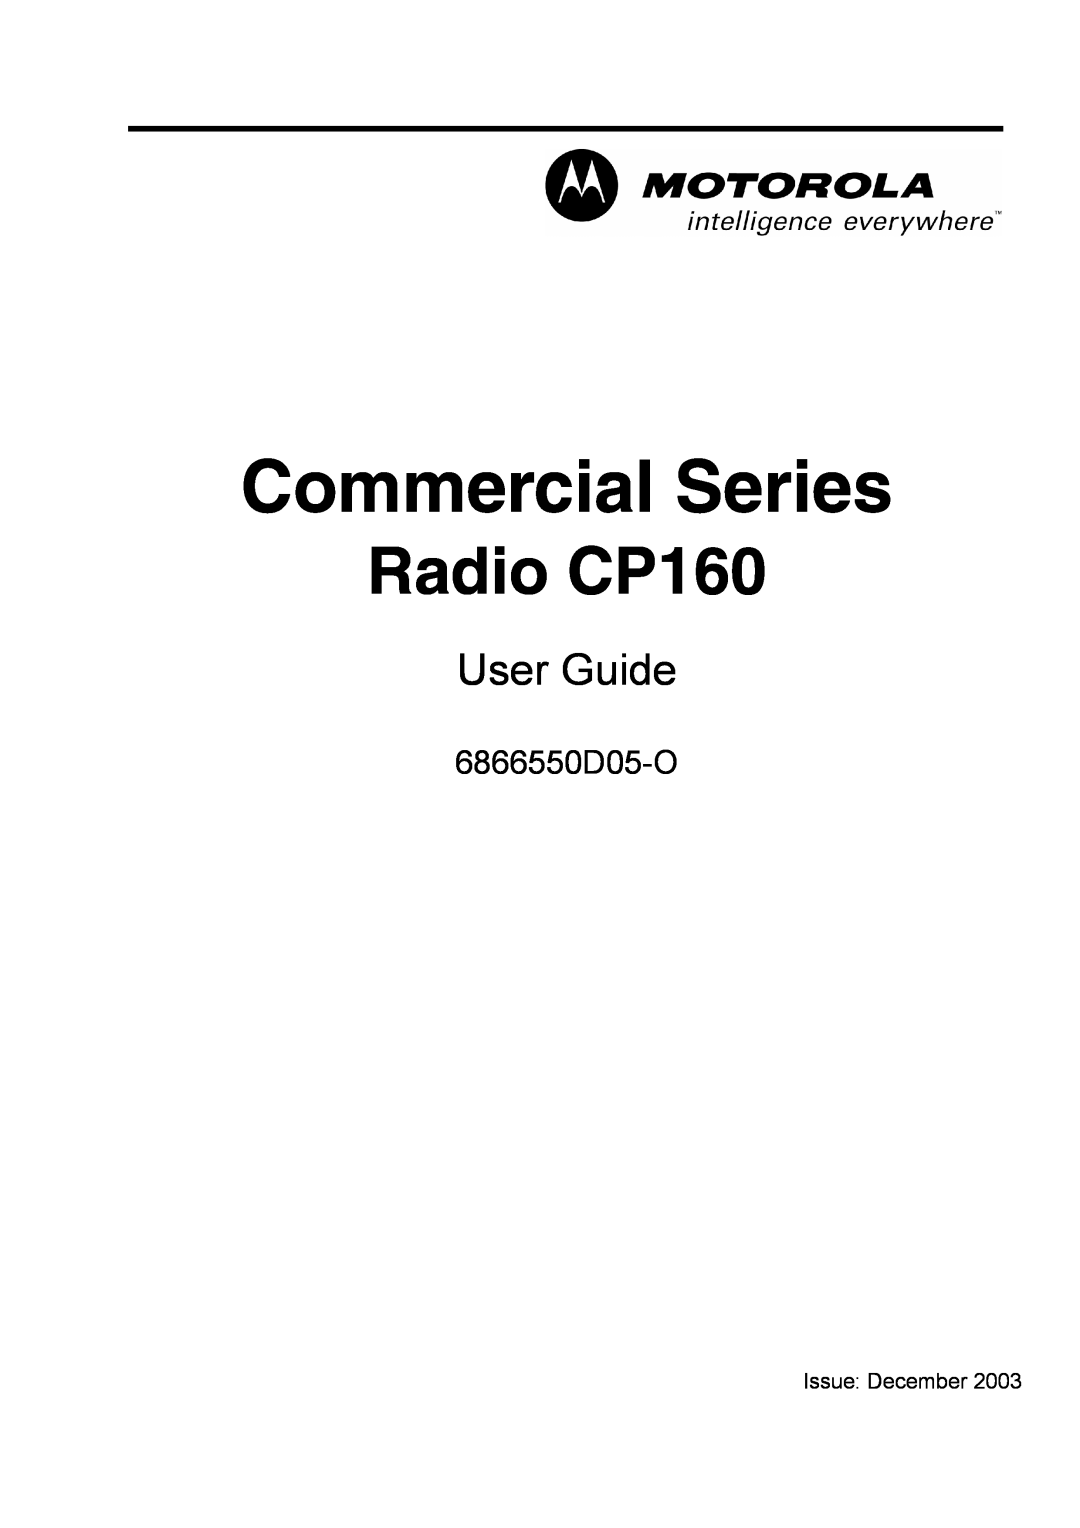 Motorola Commercial Series Radio CP160 manual 6866550D05-O, Issue December, User Guide 